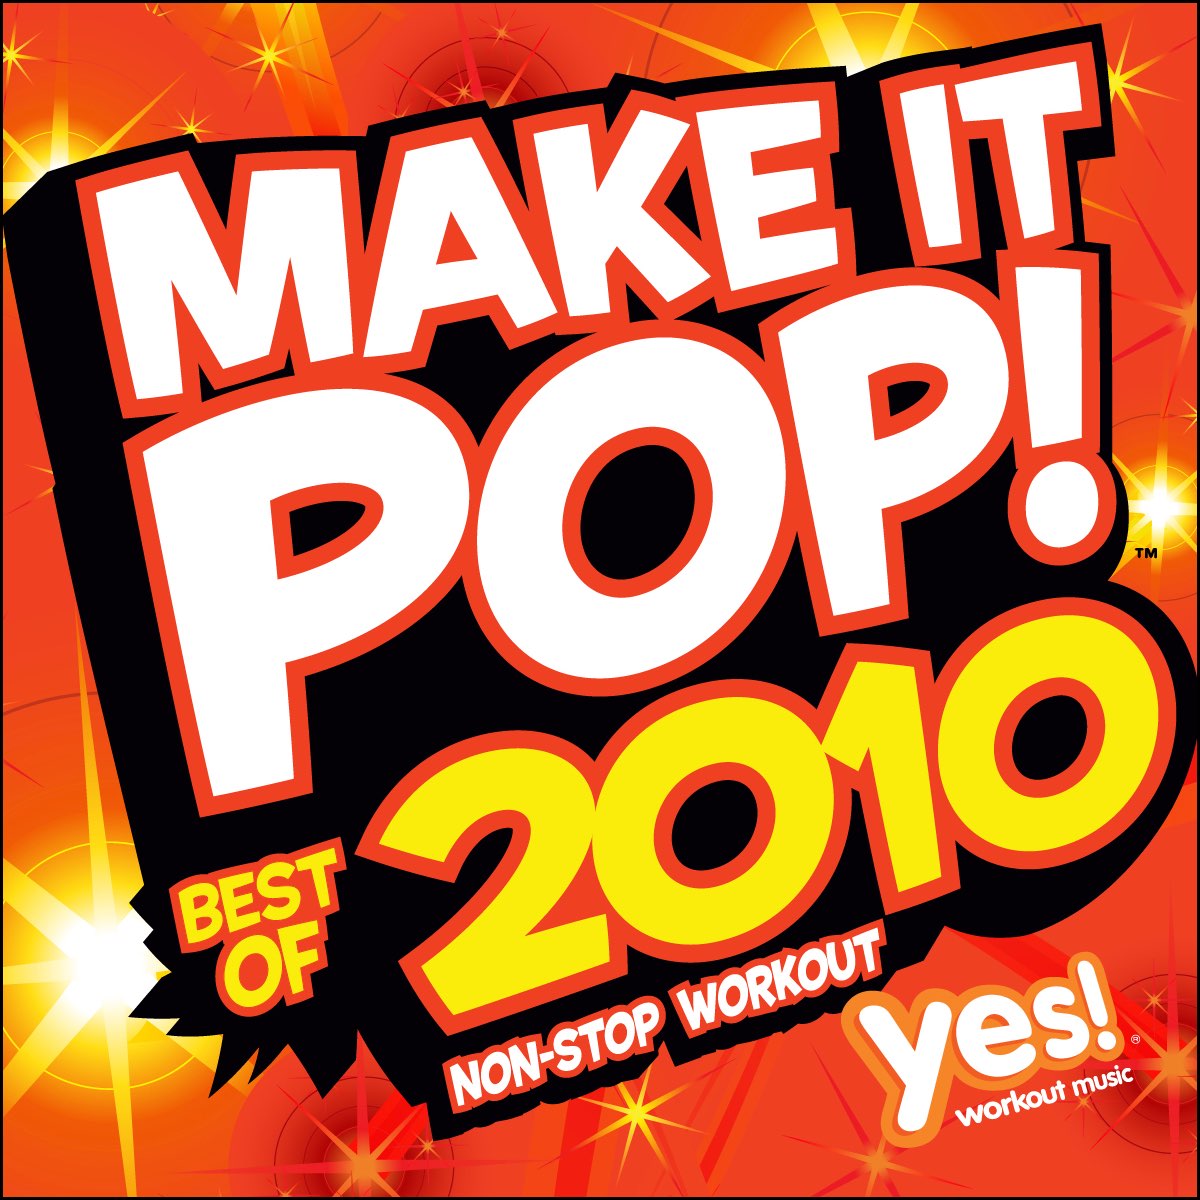 Make It Pop!: Best of 2010 (60 Minute Non-Stop Workout @ 130BPM) - Album by  Yes Fitness Music - Apple Music